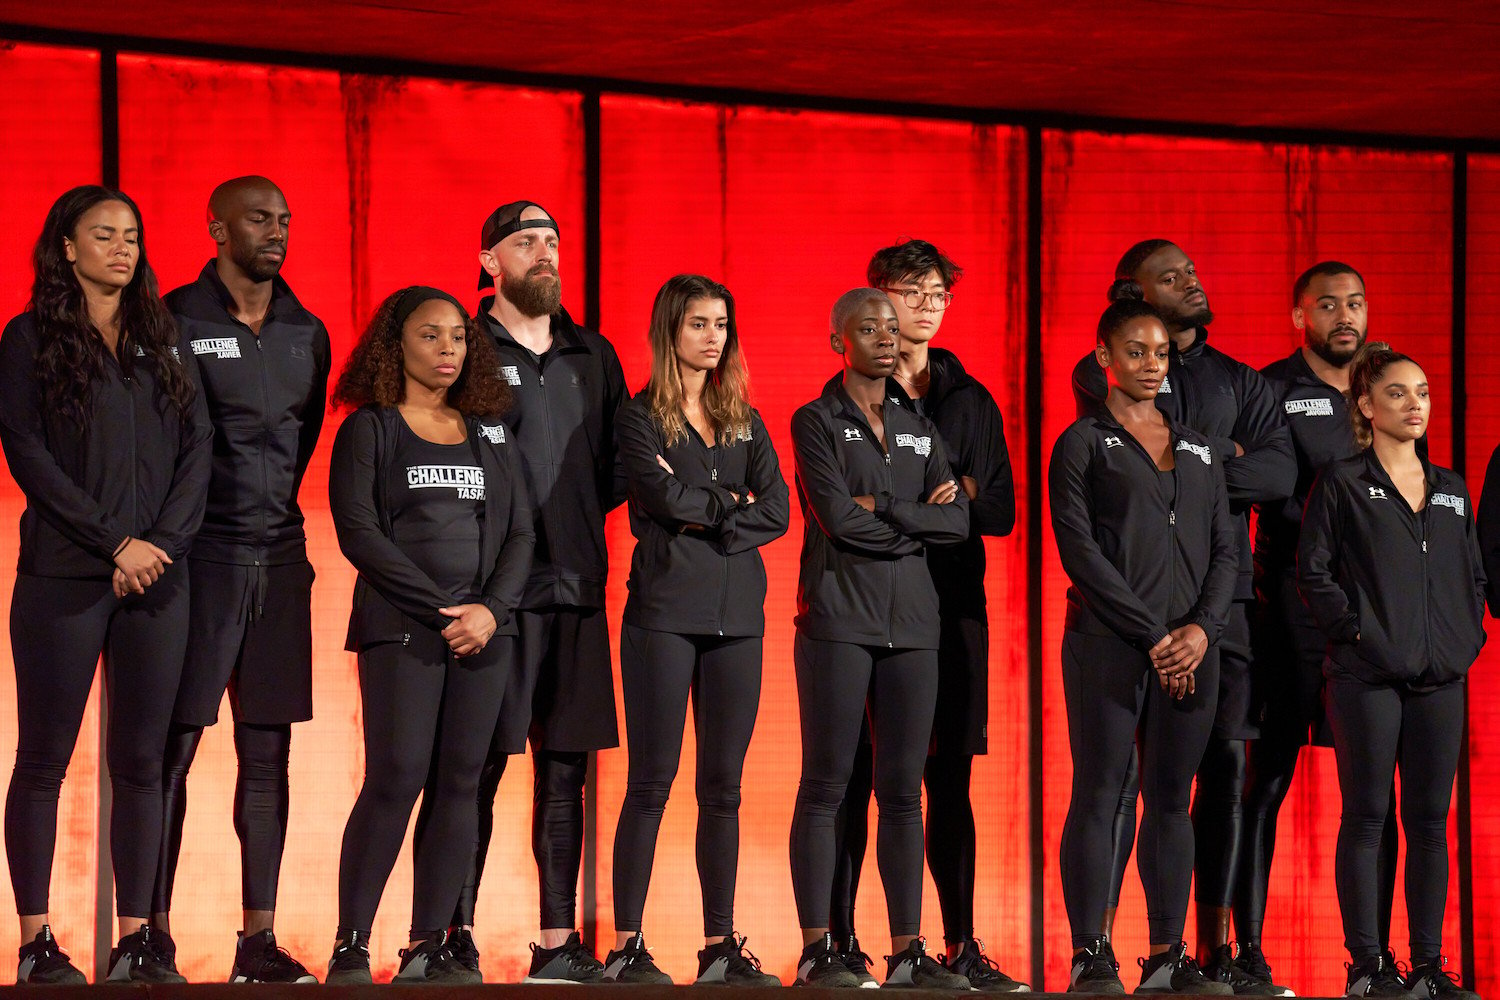 The cast of 'The Challenge: USA' standing together in black against a red background